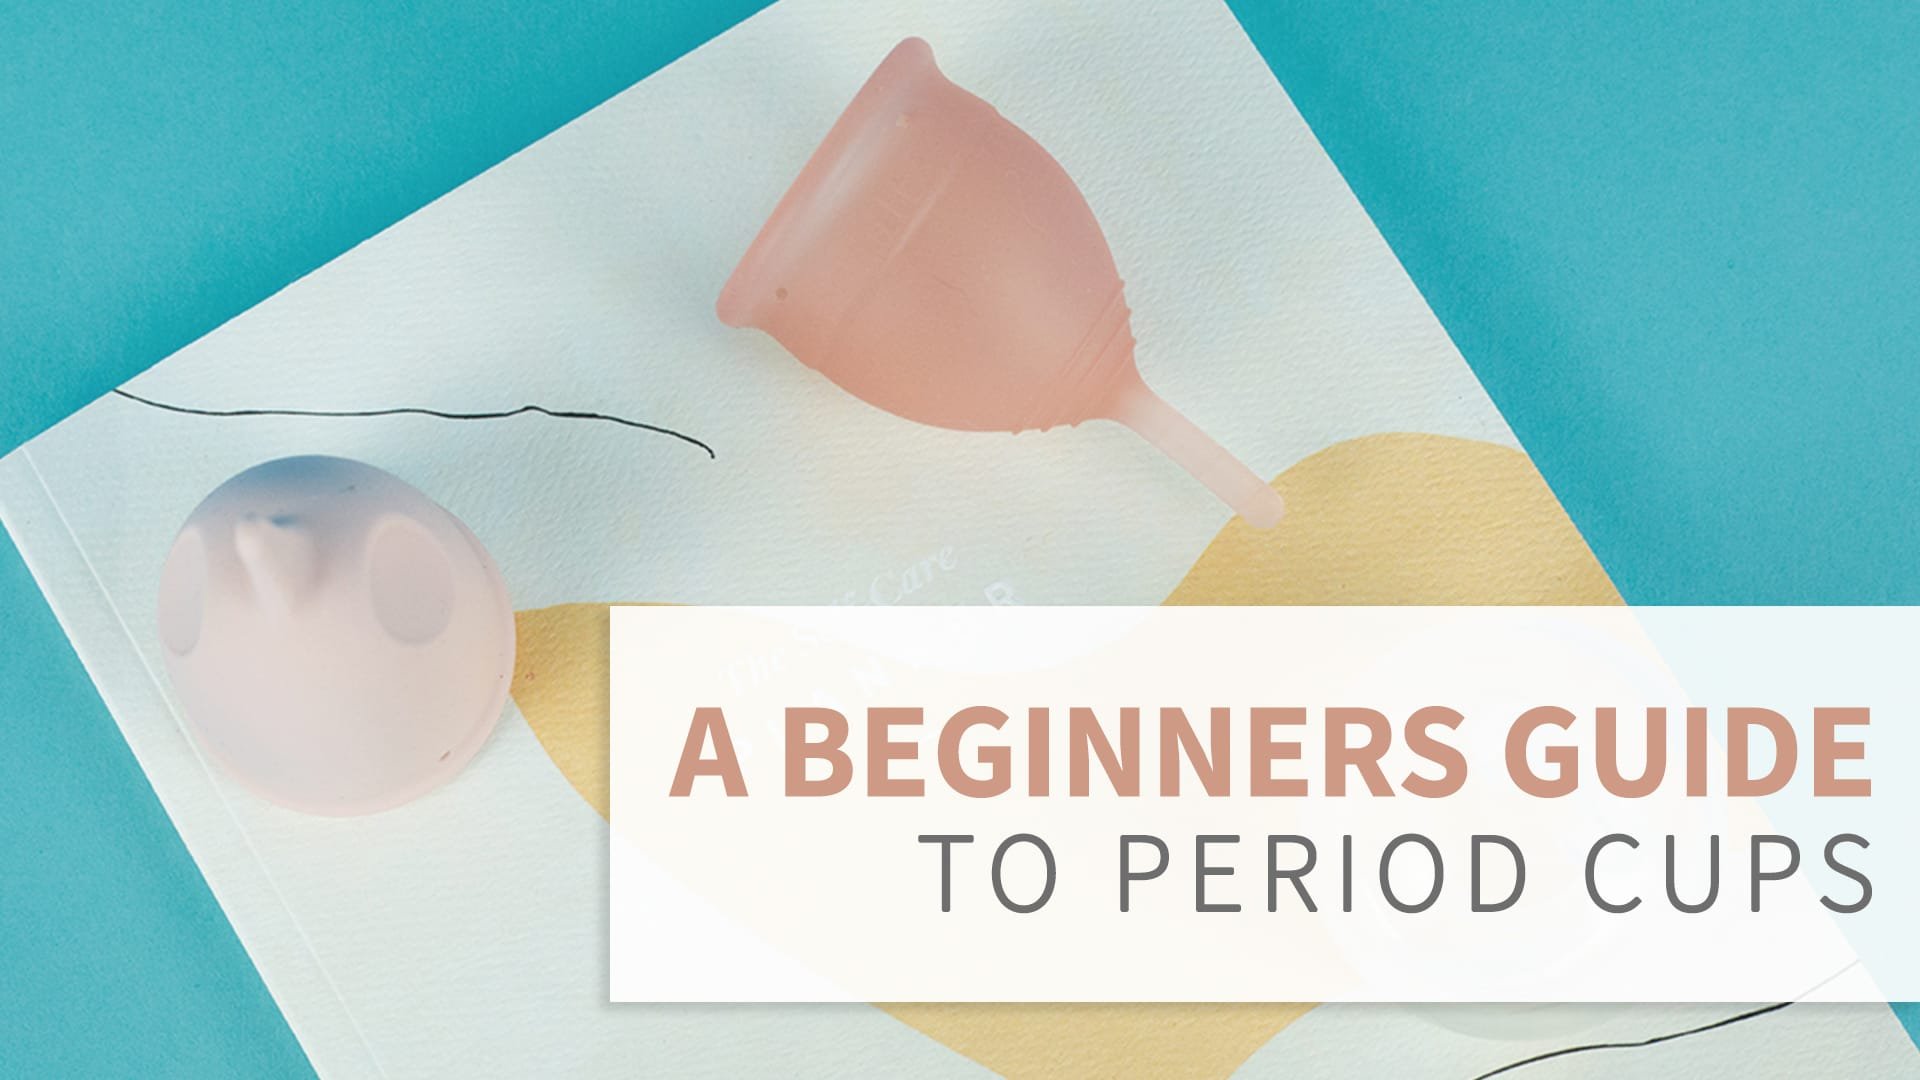 https://putacupinit.com/wp-content/uploads/2021/03/Beginners-Guide-to-Menstrual-Cups-by-Put-A-Cup-In-It.jpg